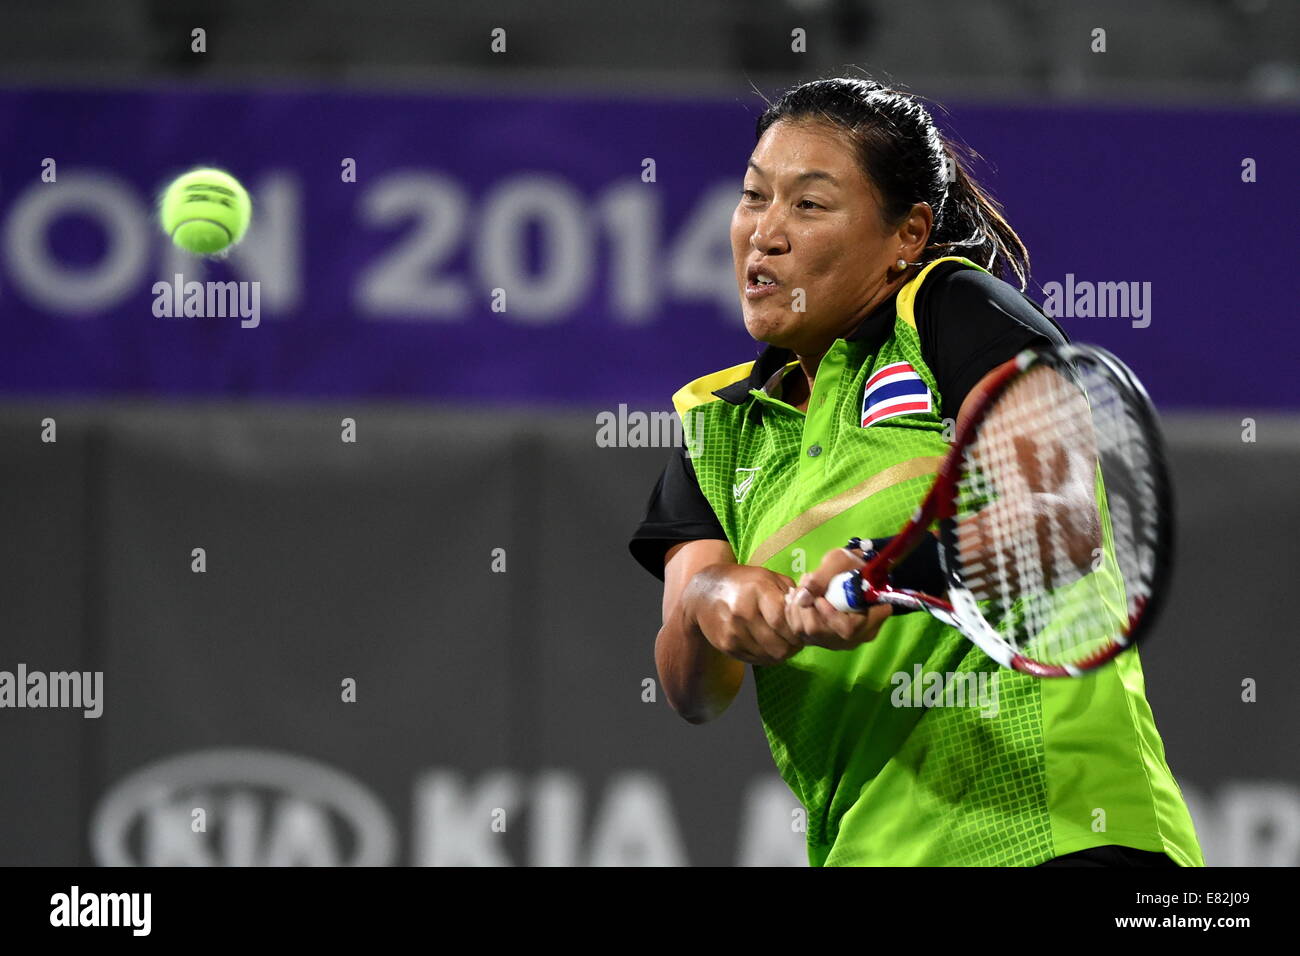 Incheon, South Korea. 29th Sep, 2014. Tanasugarn Tamarine of Thailand returns the ball during the women's doubles gold medal match of tennis against Hsieh Su Wei and Chan Chin Wei of Chinese Taipei at the 17th Asian Games in Incheon, South Korea, Sept. 29, 2014. Thailand defeated Chinese Taipei 2-1 and claimed the title. © Gao Jianjun/Xinhua/Alamy Live News Stock Photo